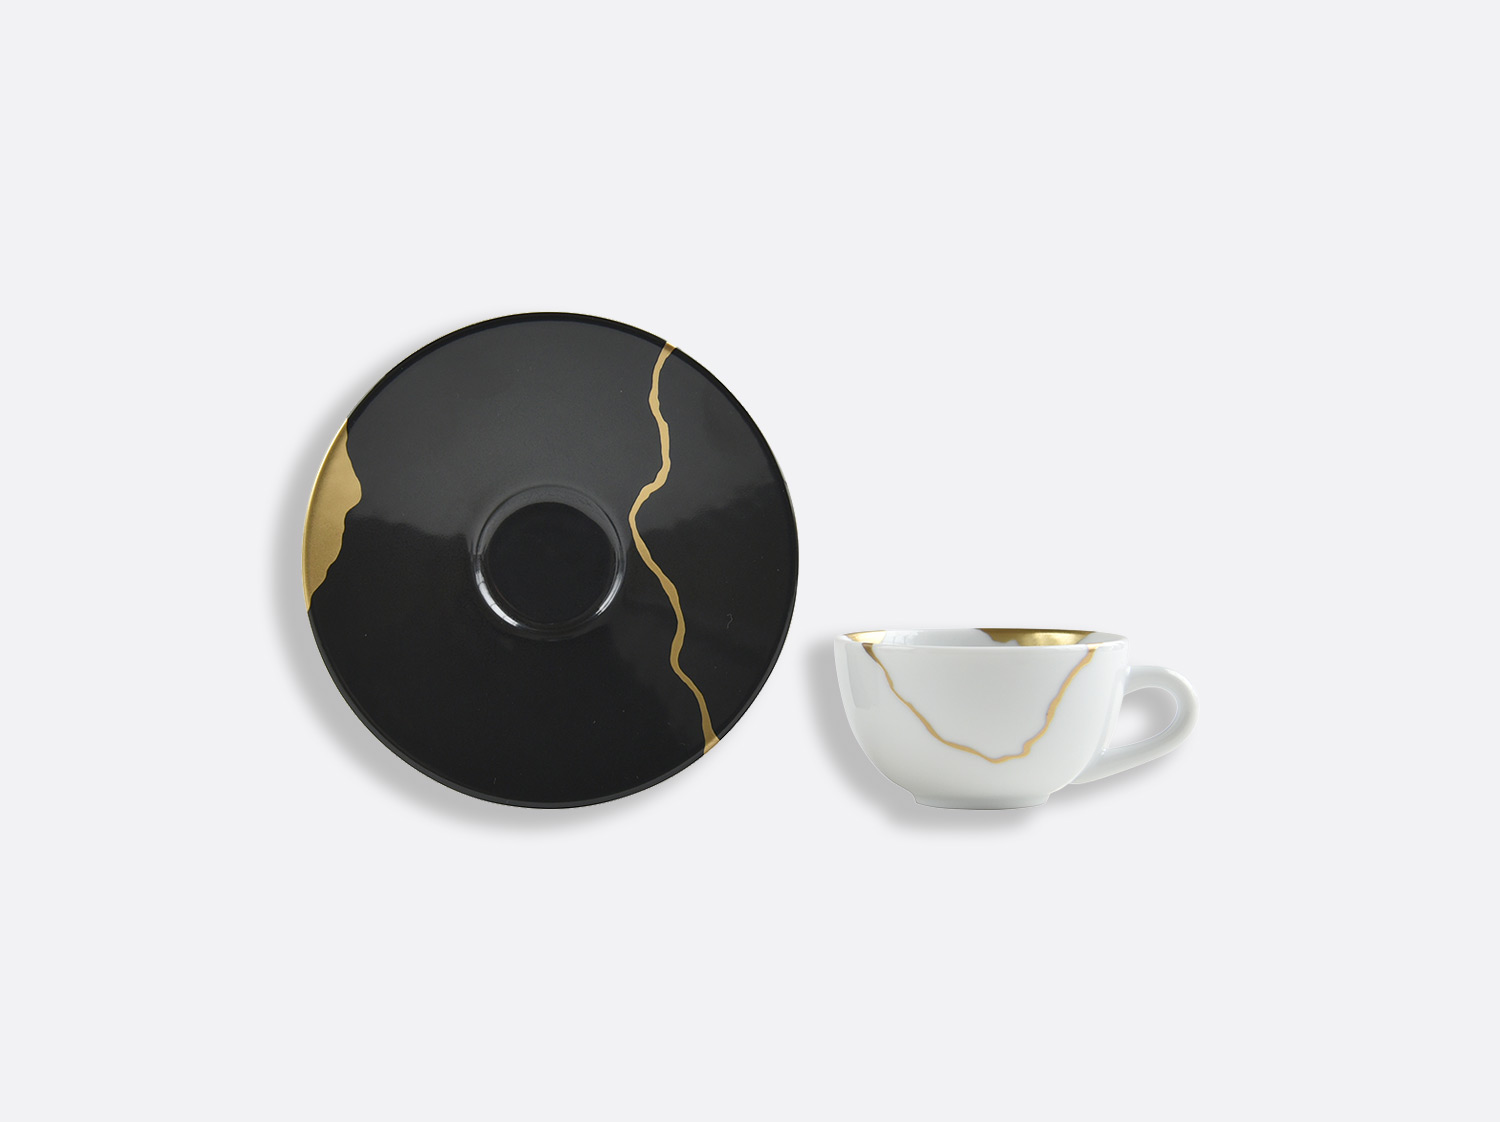 China Set of espresso cups and saucers 3.5 oz - Per unit of the collection KINTSUGI Charbon | Bernardaud